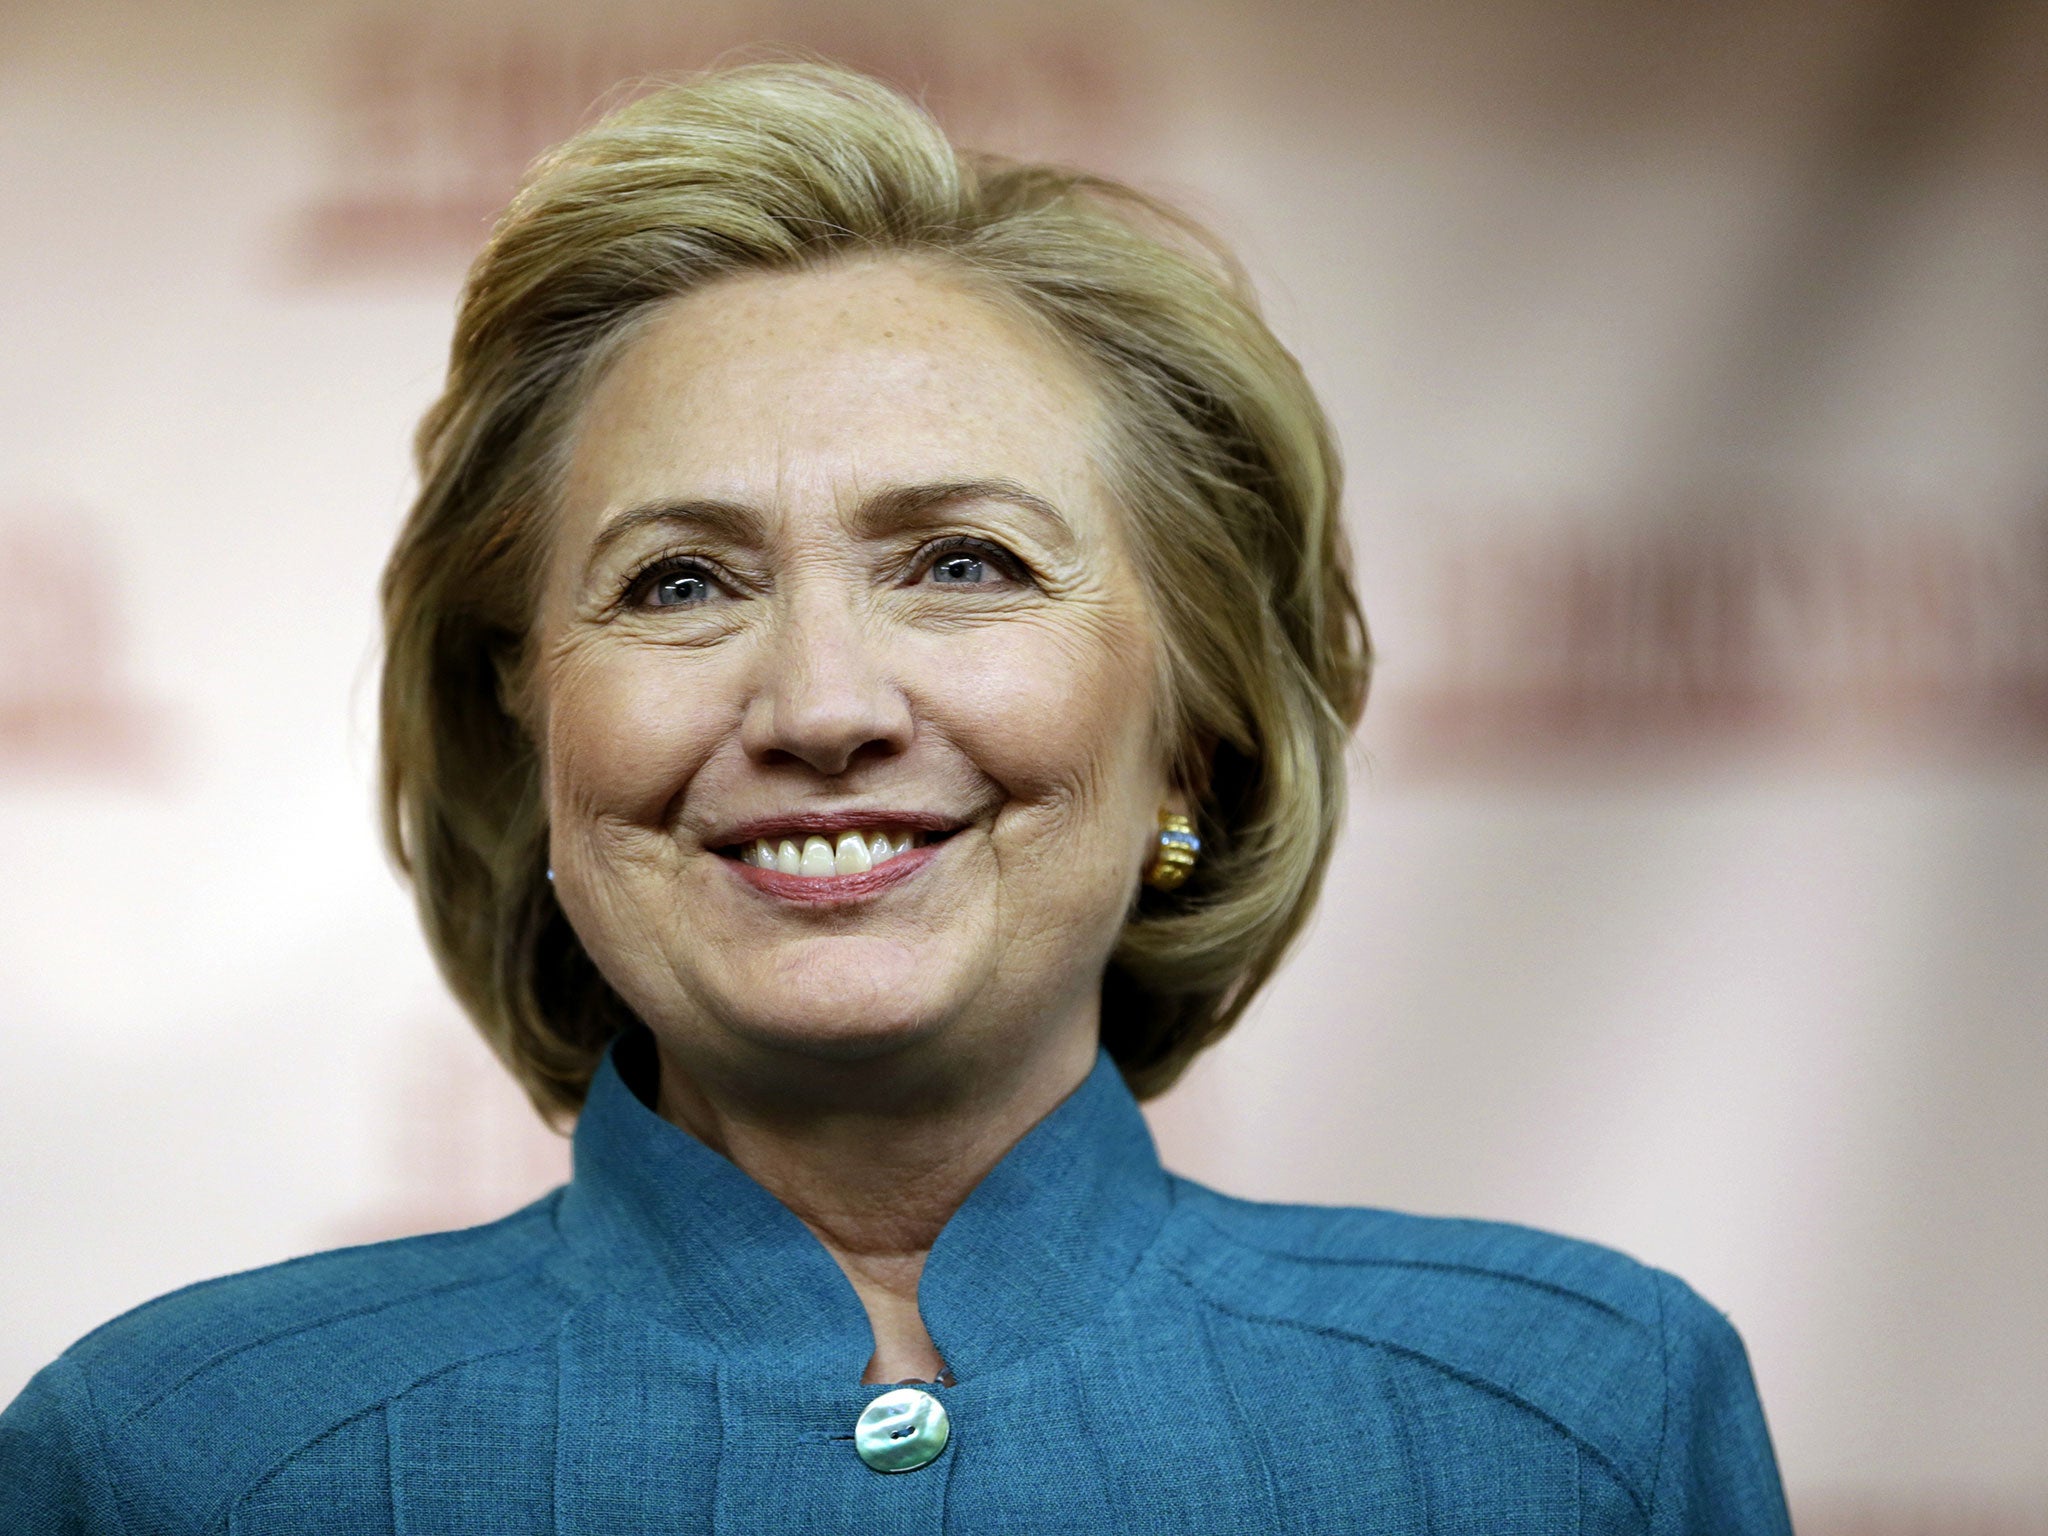 It will likely be Hillary Clinton’s last drive for power, as she is now 67